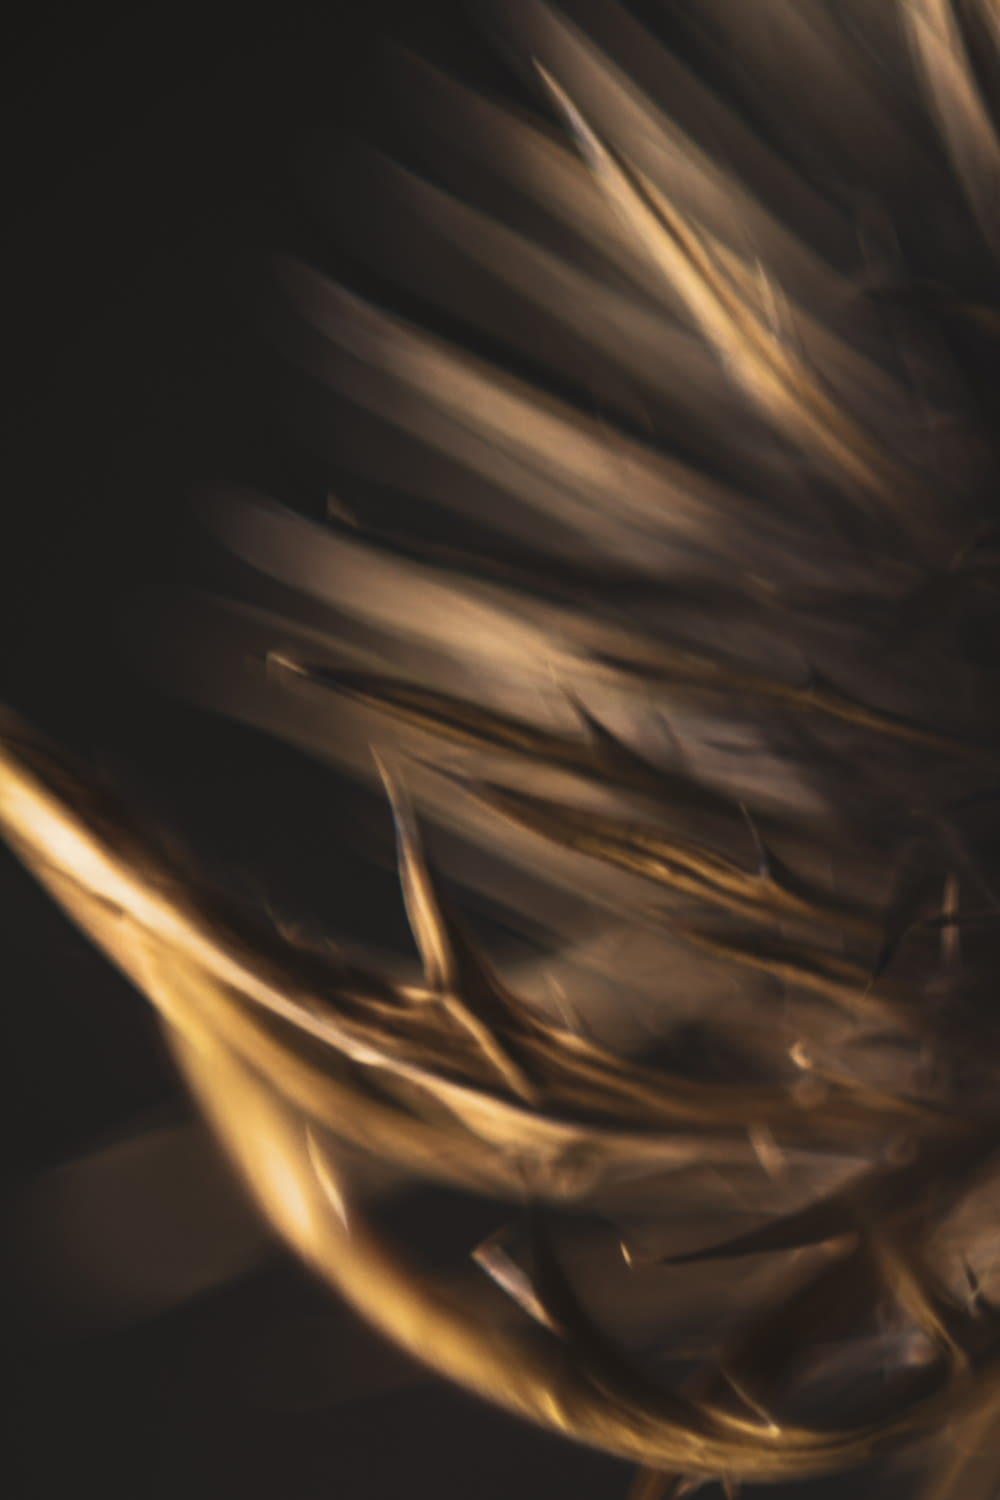 a blurry photo of a bird's feathers in flight